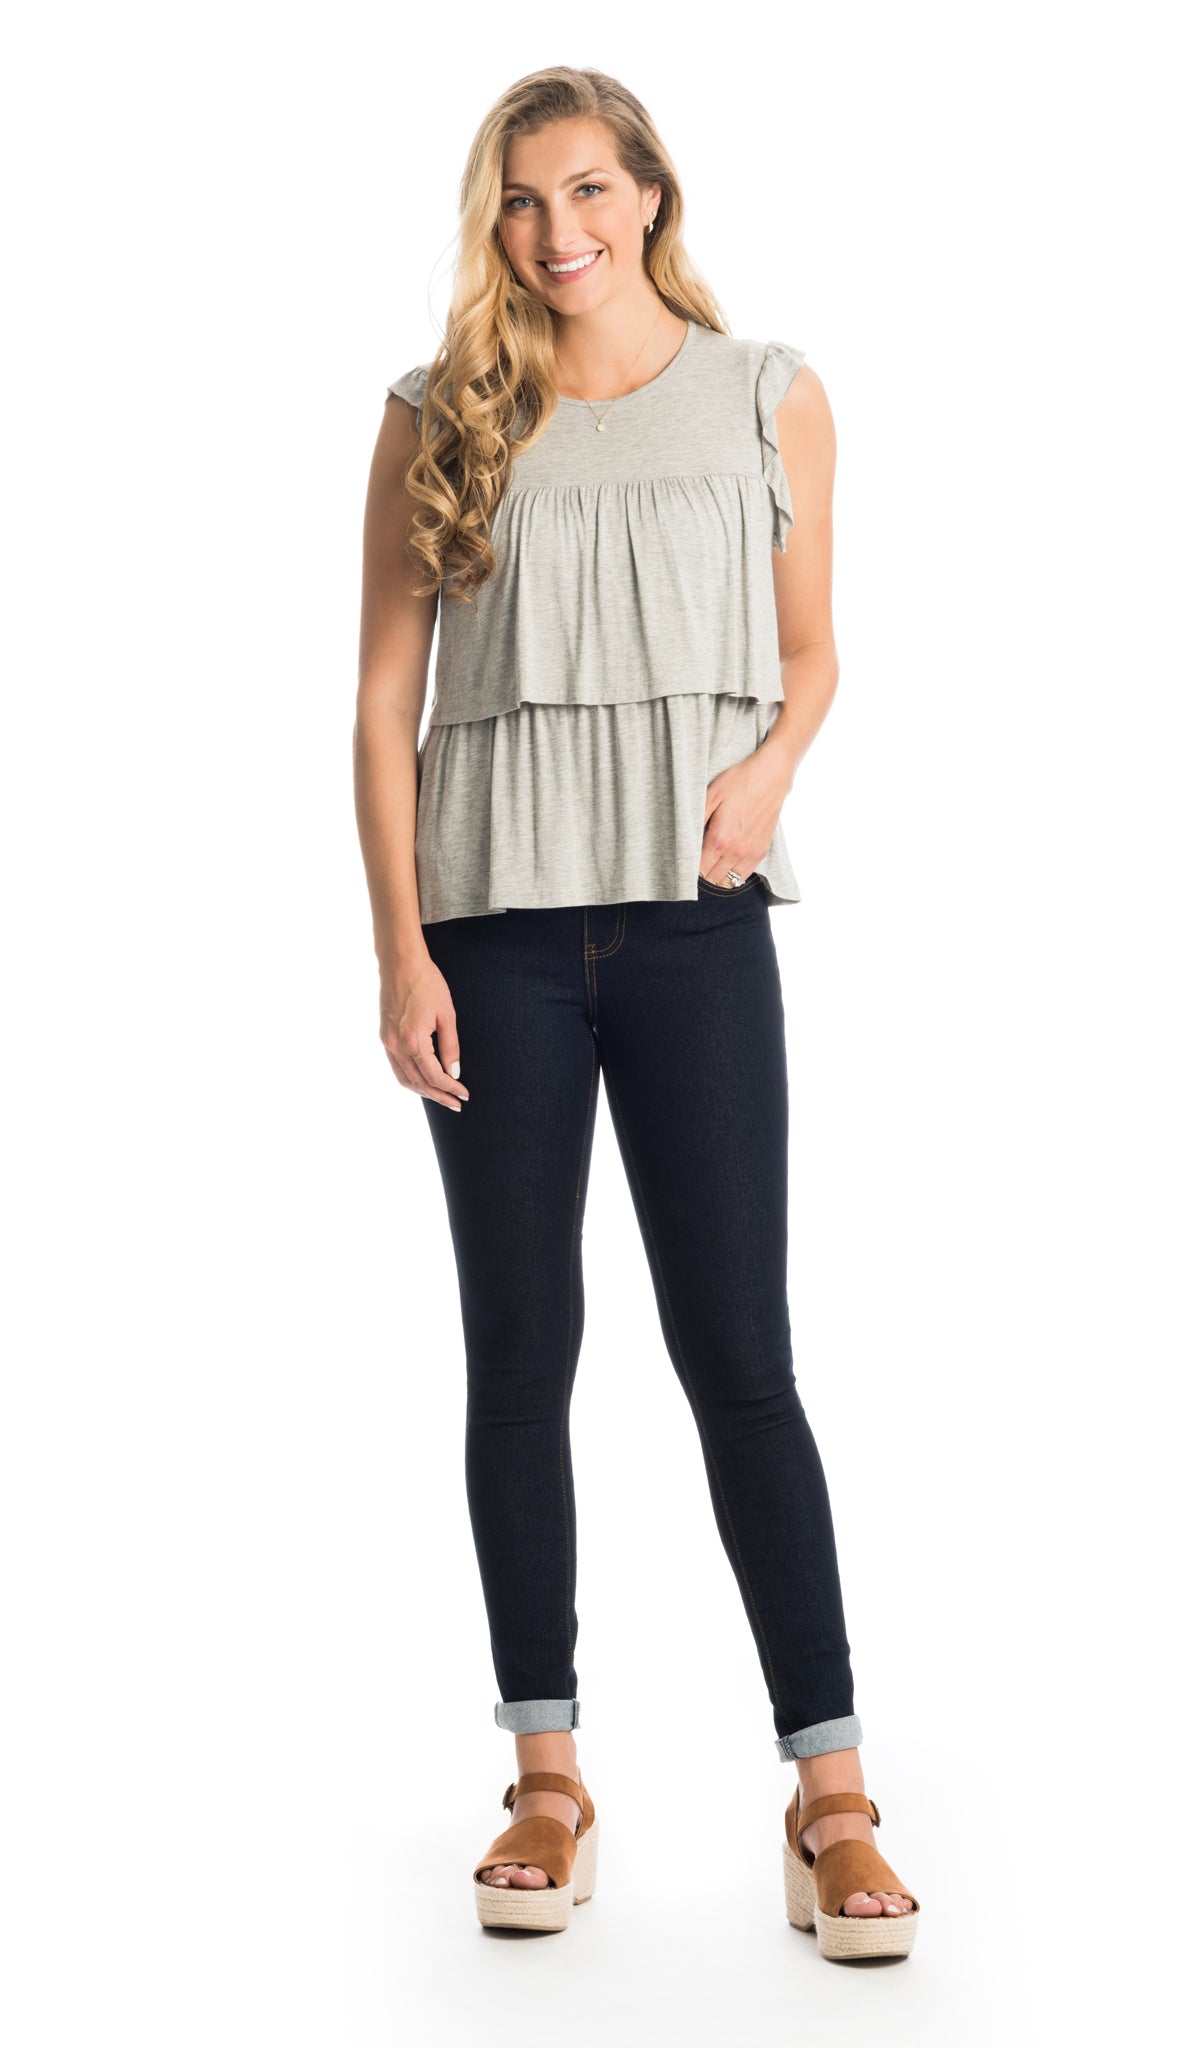 Heather Grey Valentina  top worn by woman as non-maternity style and dark denim with one hand in her pocket.